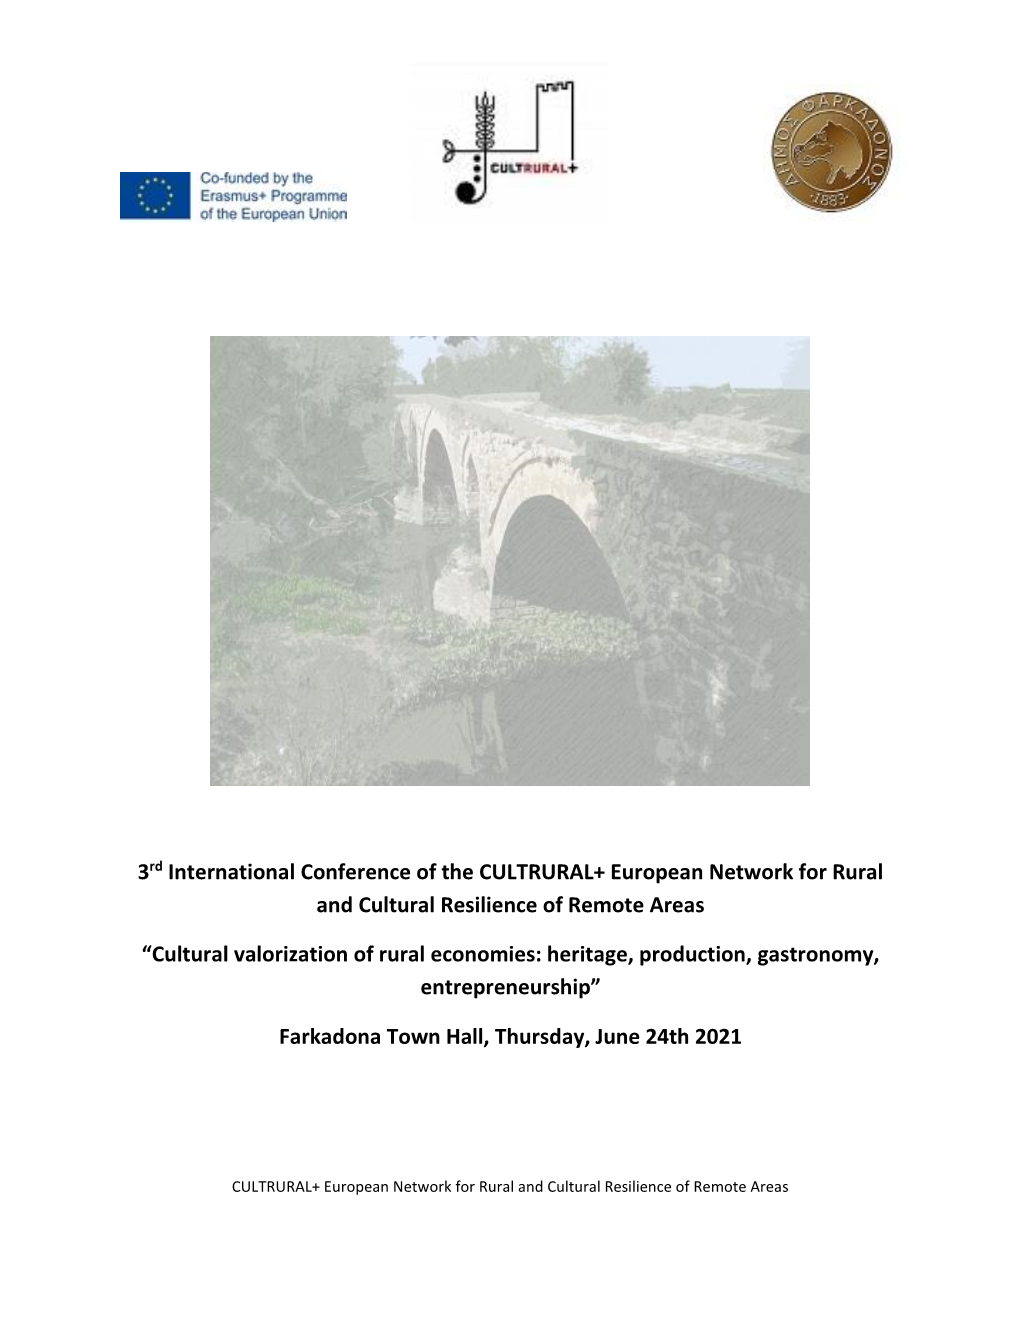 3Rd International Conference of the CULTRURAL+ European Network for Rural and Cultural Resilience of Remote Areas